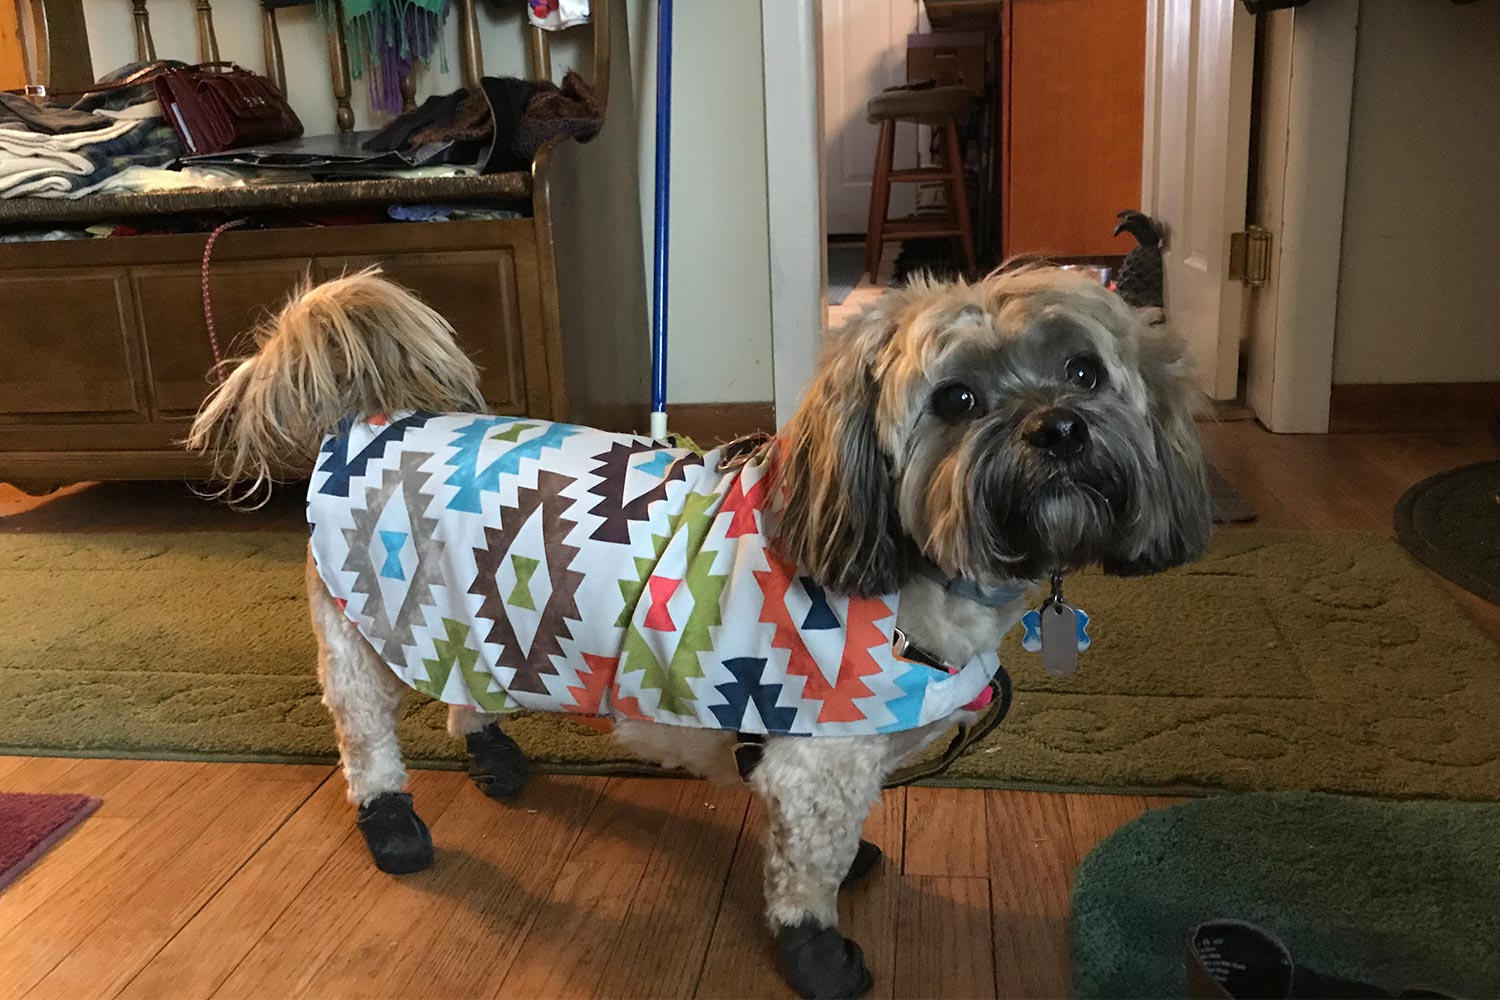 Angie H. in Kingston, NY sent a picture of her Woofie – he is sporting some waterproof dog boots and a rain slicker!